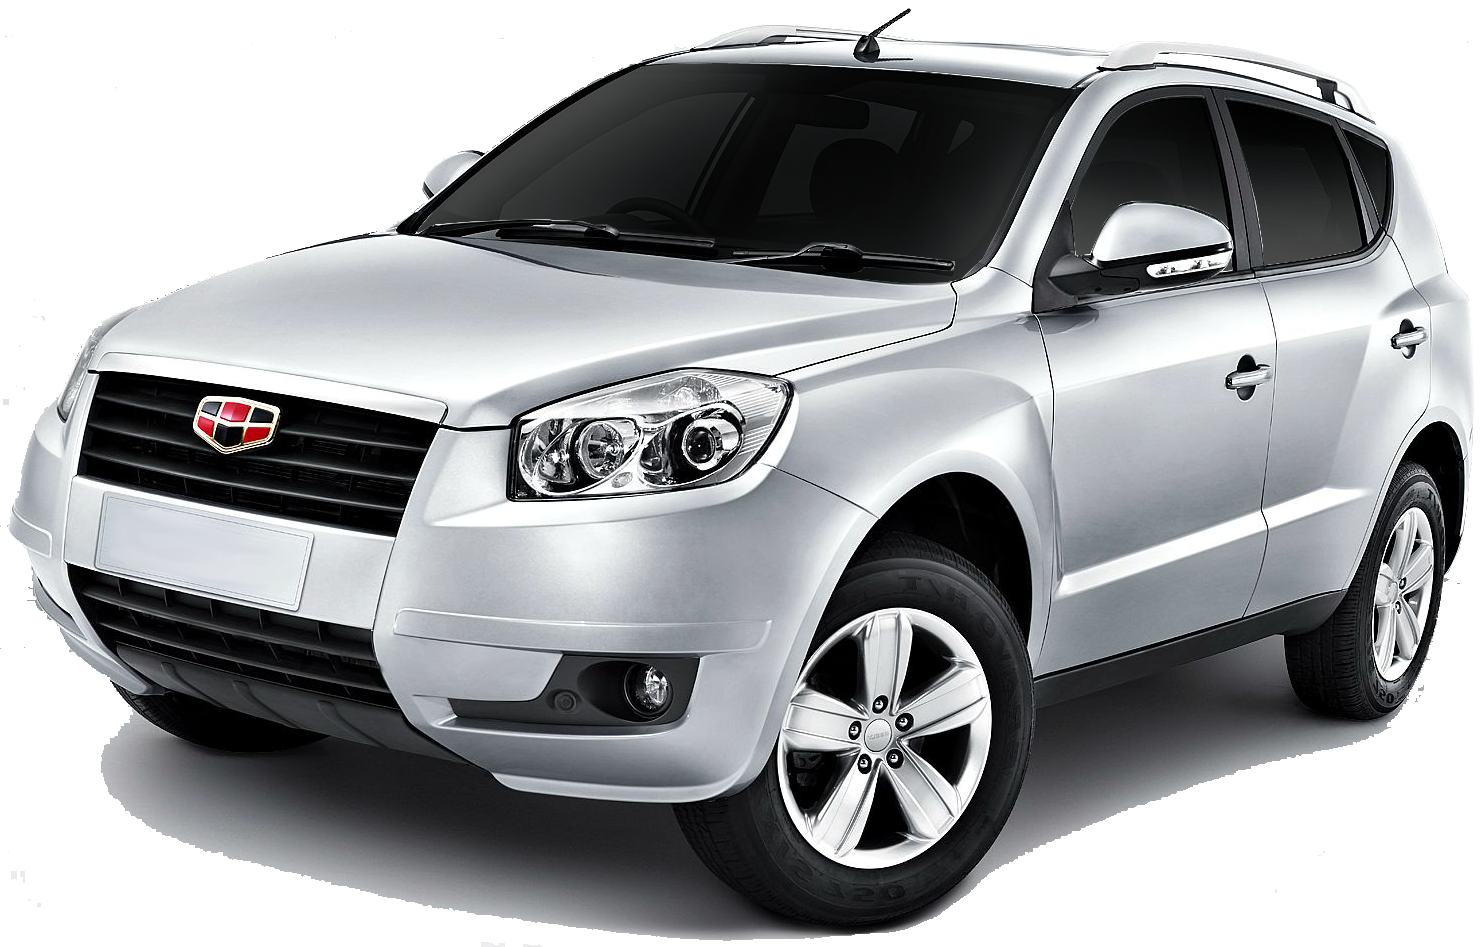 Geely Emgrand x7. Geely Emgrand x7 2016. Автомобиль Geely Emgrand x7. Geely Emgrand x7 2013. Geely x7 2016